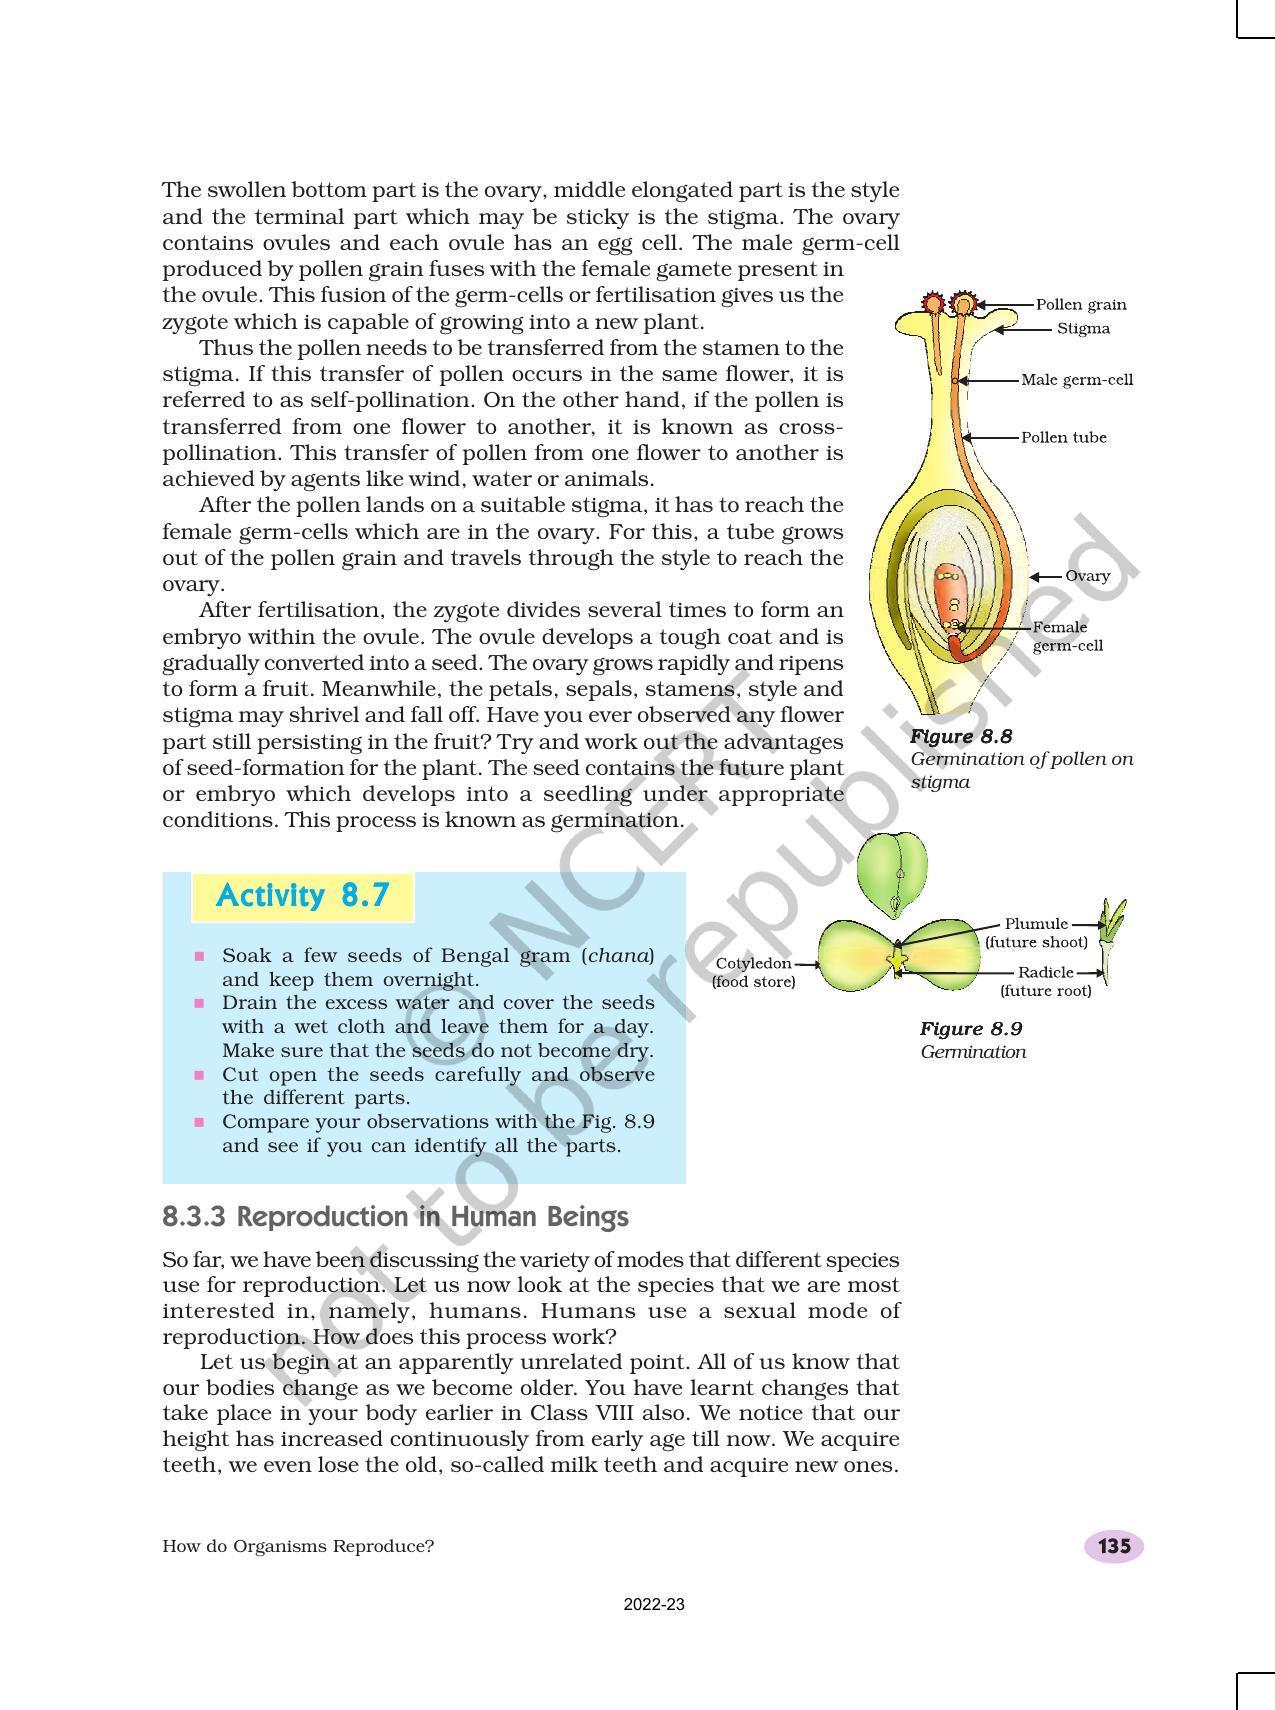 NCERT Book for Class 10 Science Chapter 8 How do Organisms Reproduce? - Page 9